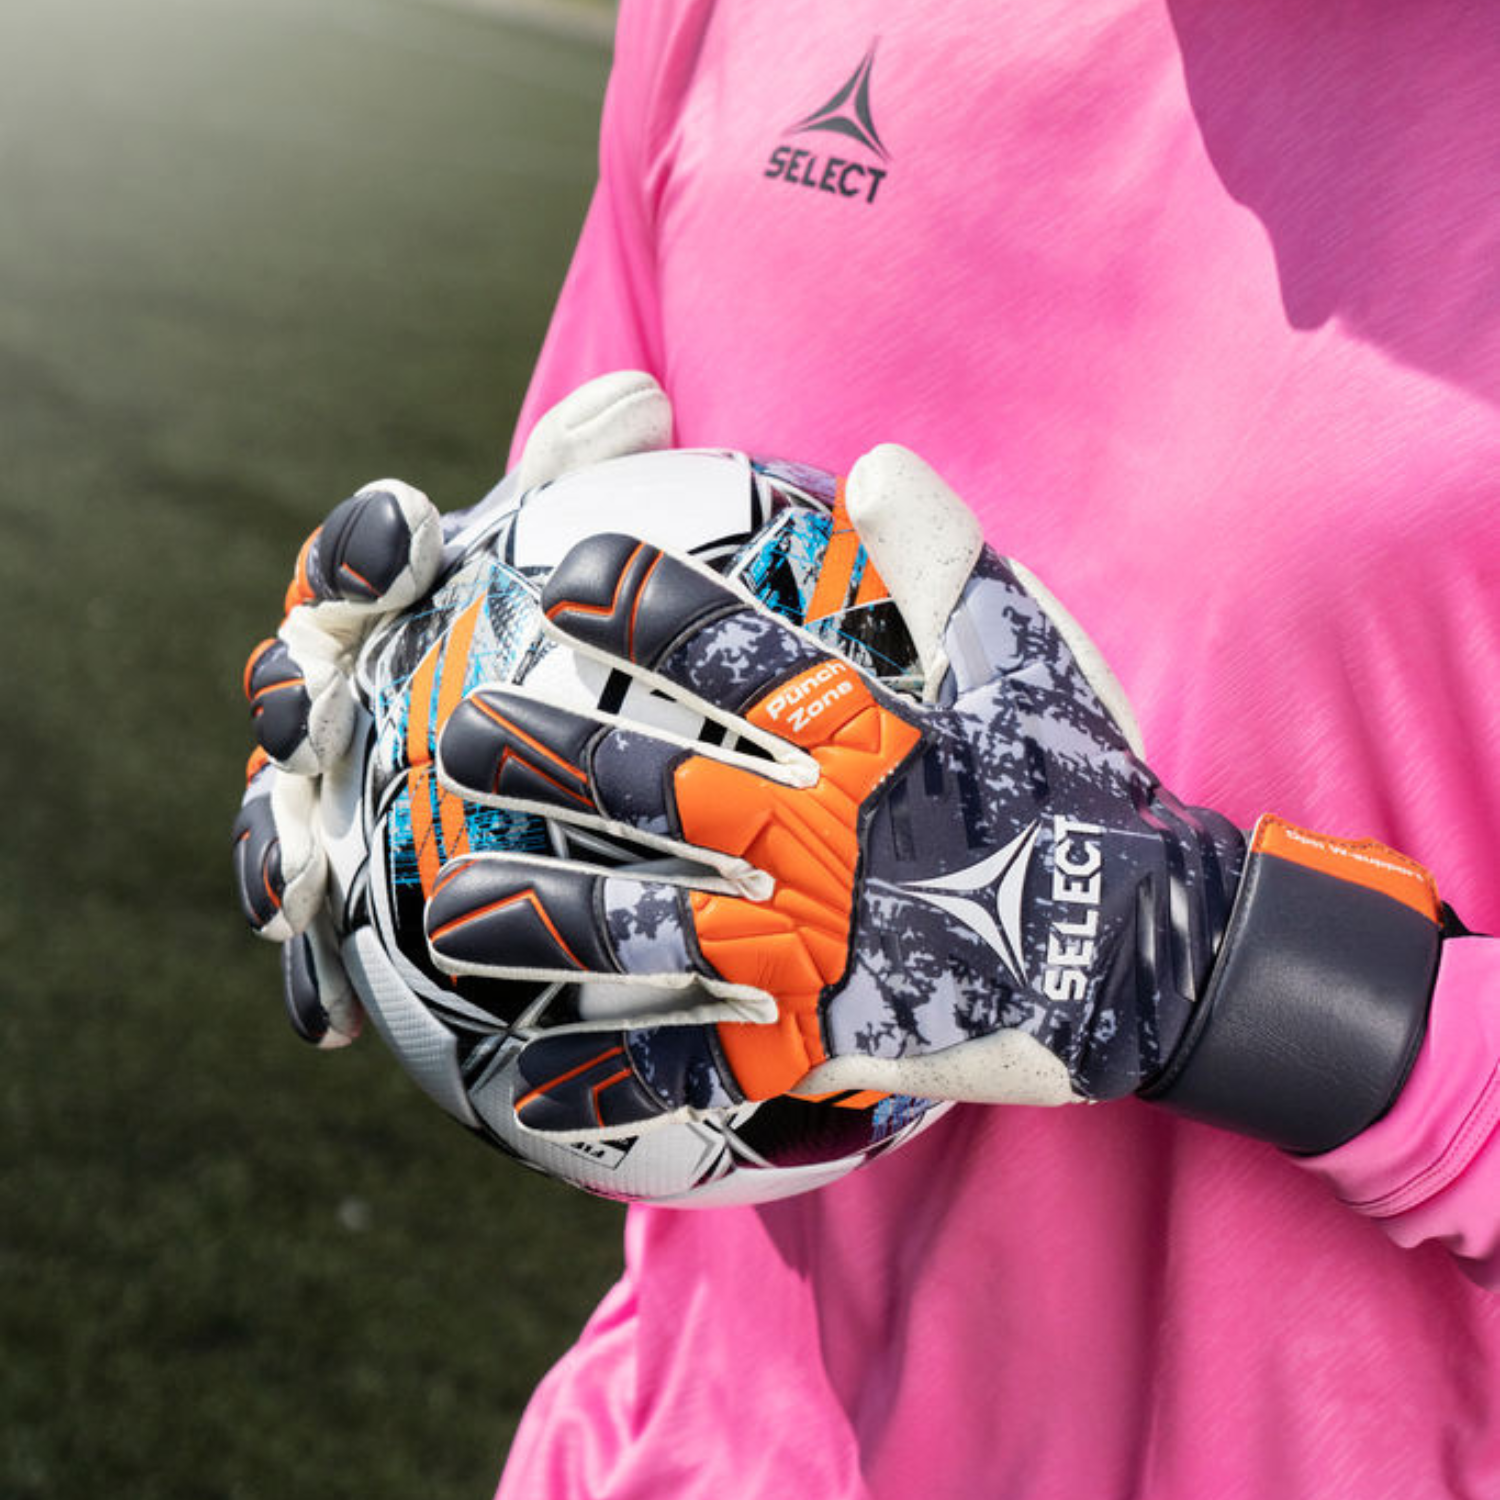 Protective Gear For Goalkeepers – Elite Keepers Shop